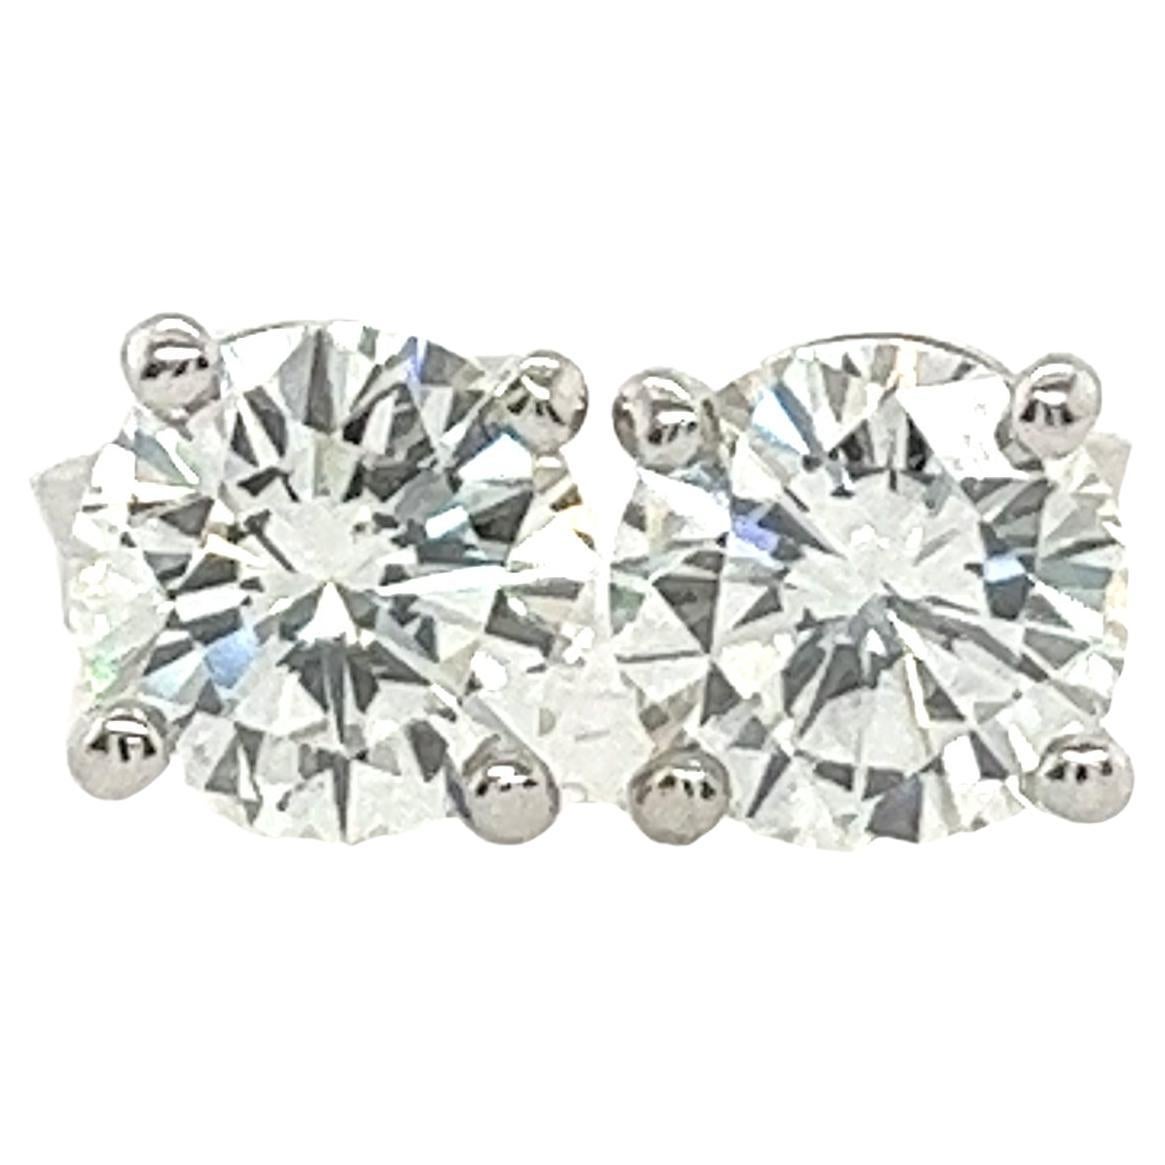 18ct White Gold Diamond Stud Earrings, Set With 2.06ct Natural Diamonds